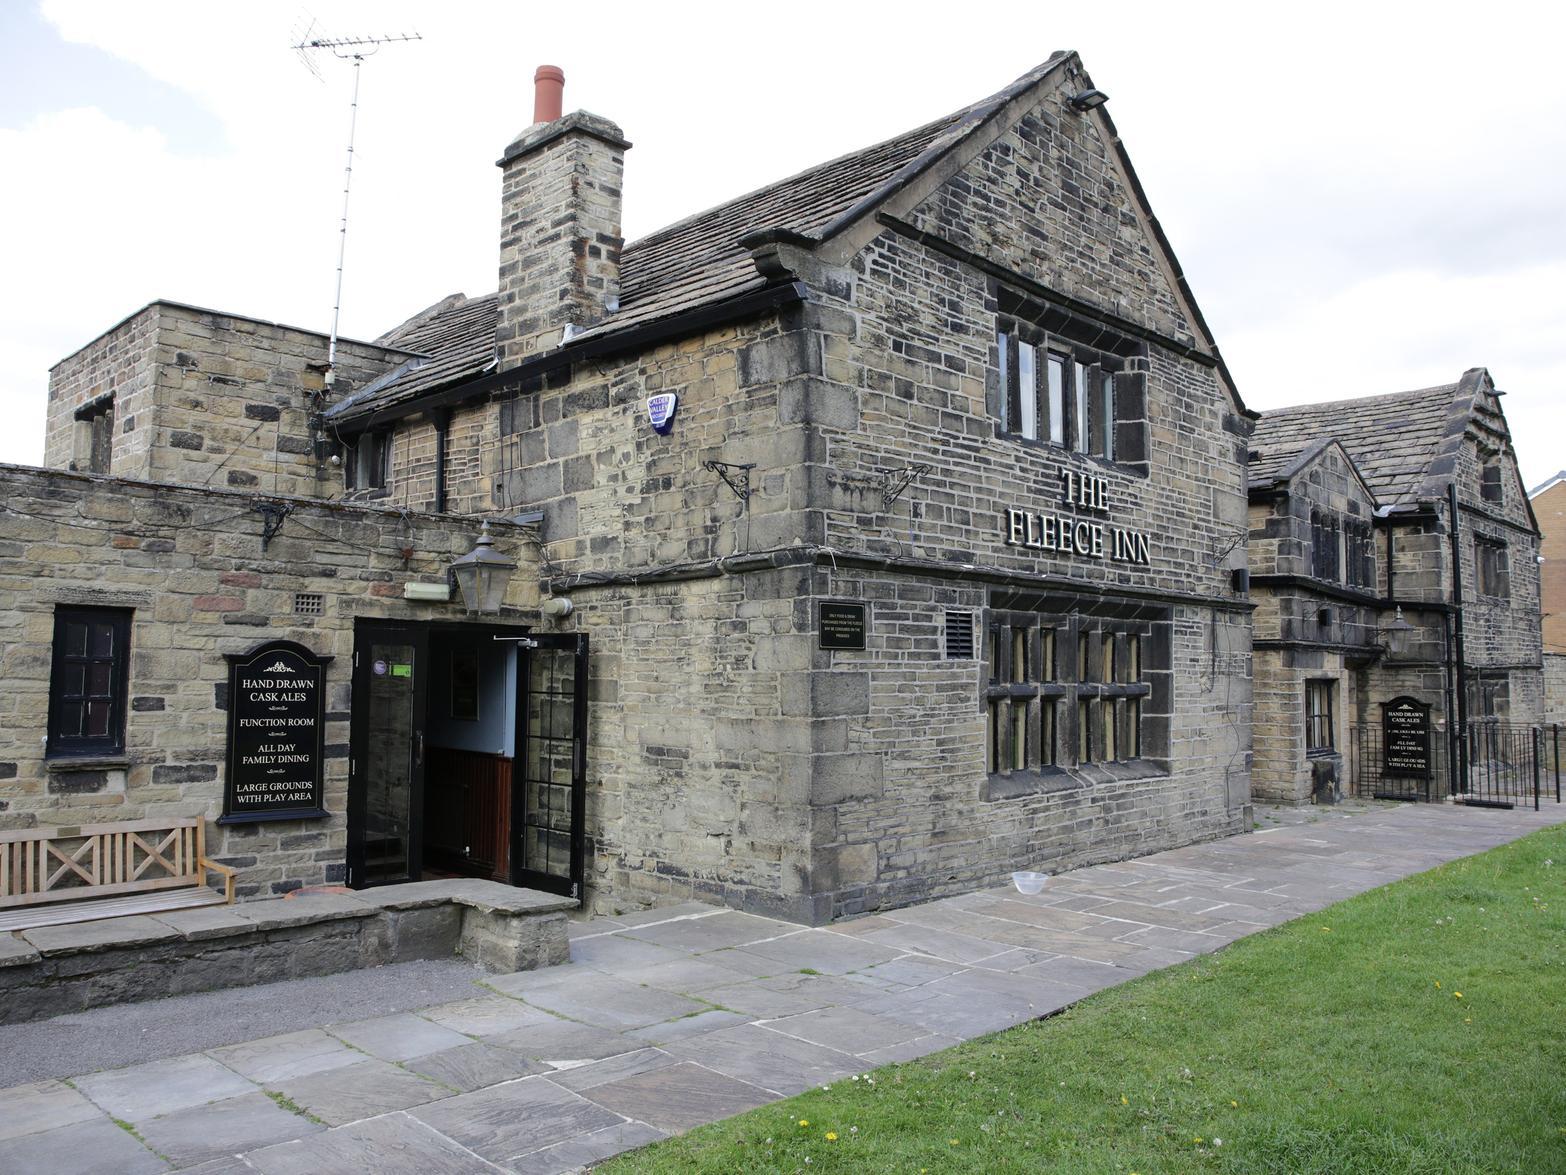 Recently featured in the BBC series Gentleman Jack, this Elland pub features a lot of history alongside its drinks offerings. Visitors praised the great atmosphere as well as the friendly staff.